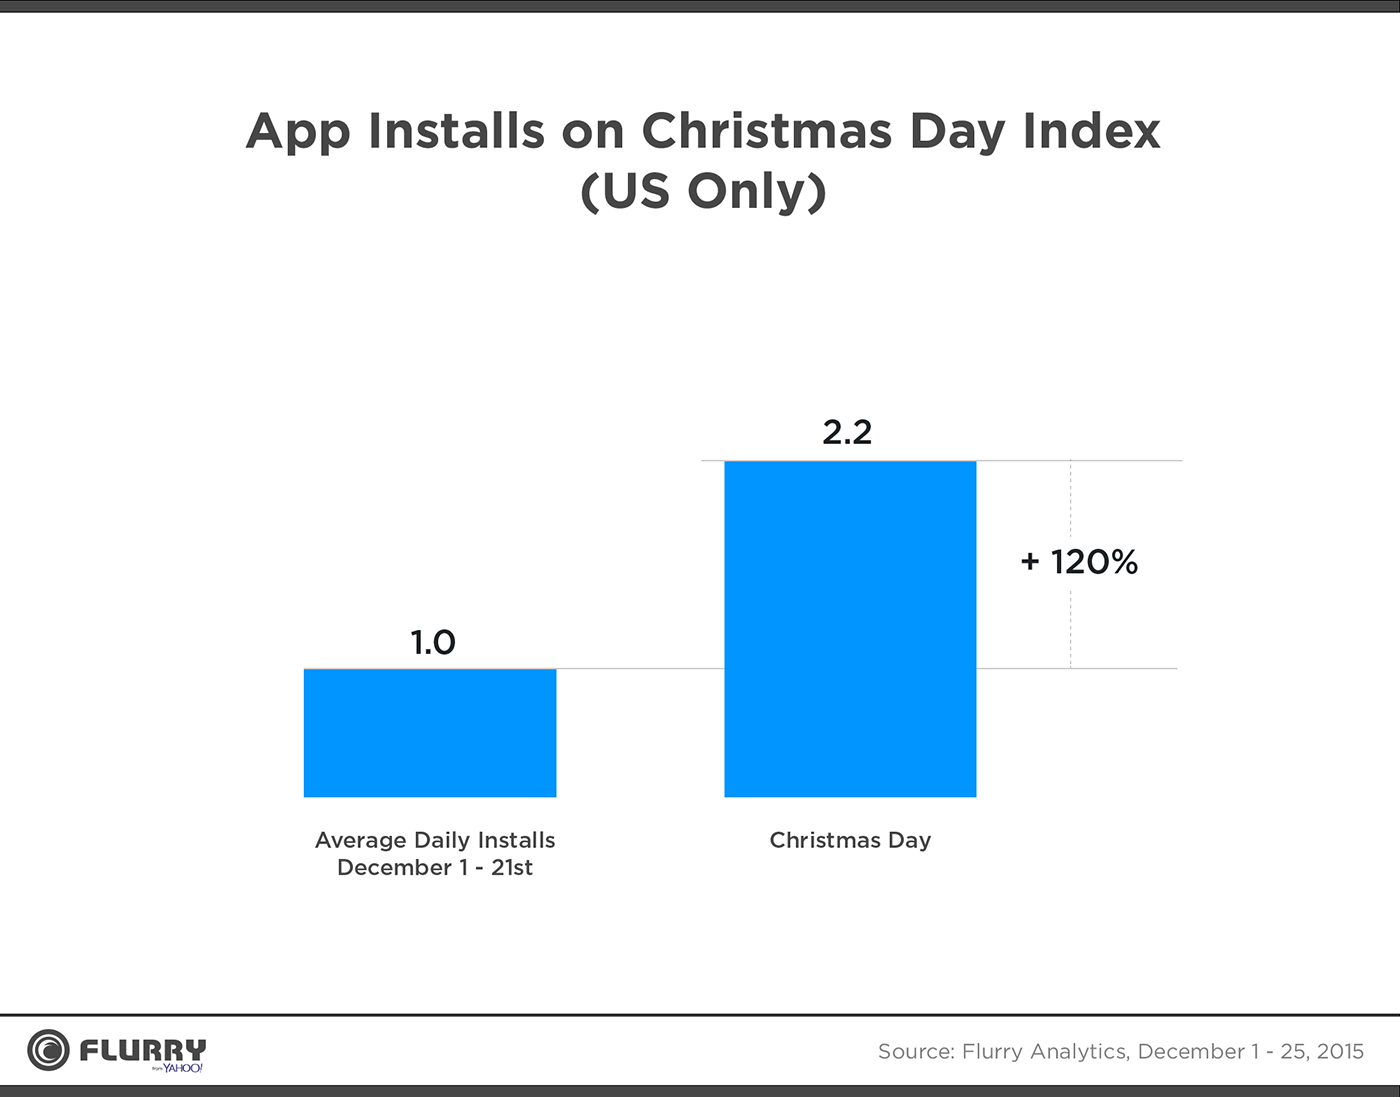 App Installs on Christmas Day Index (US Only)